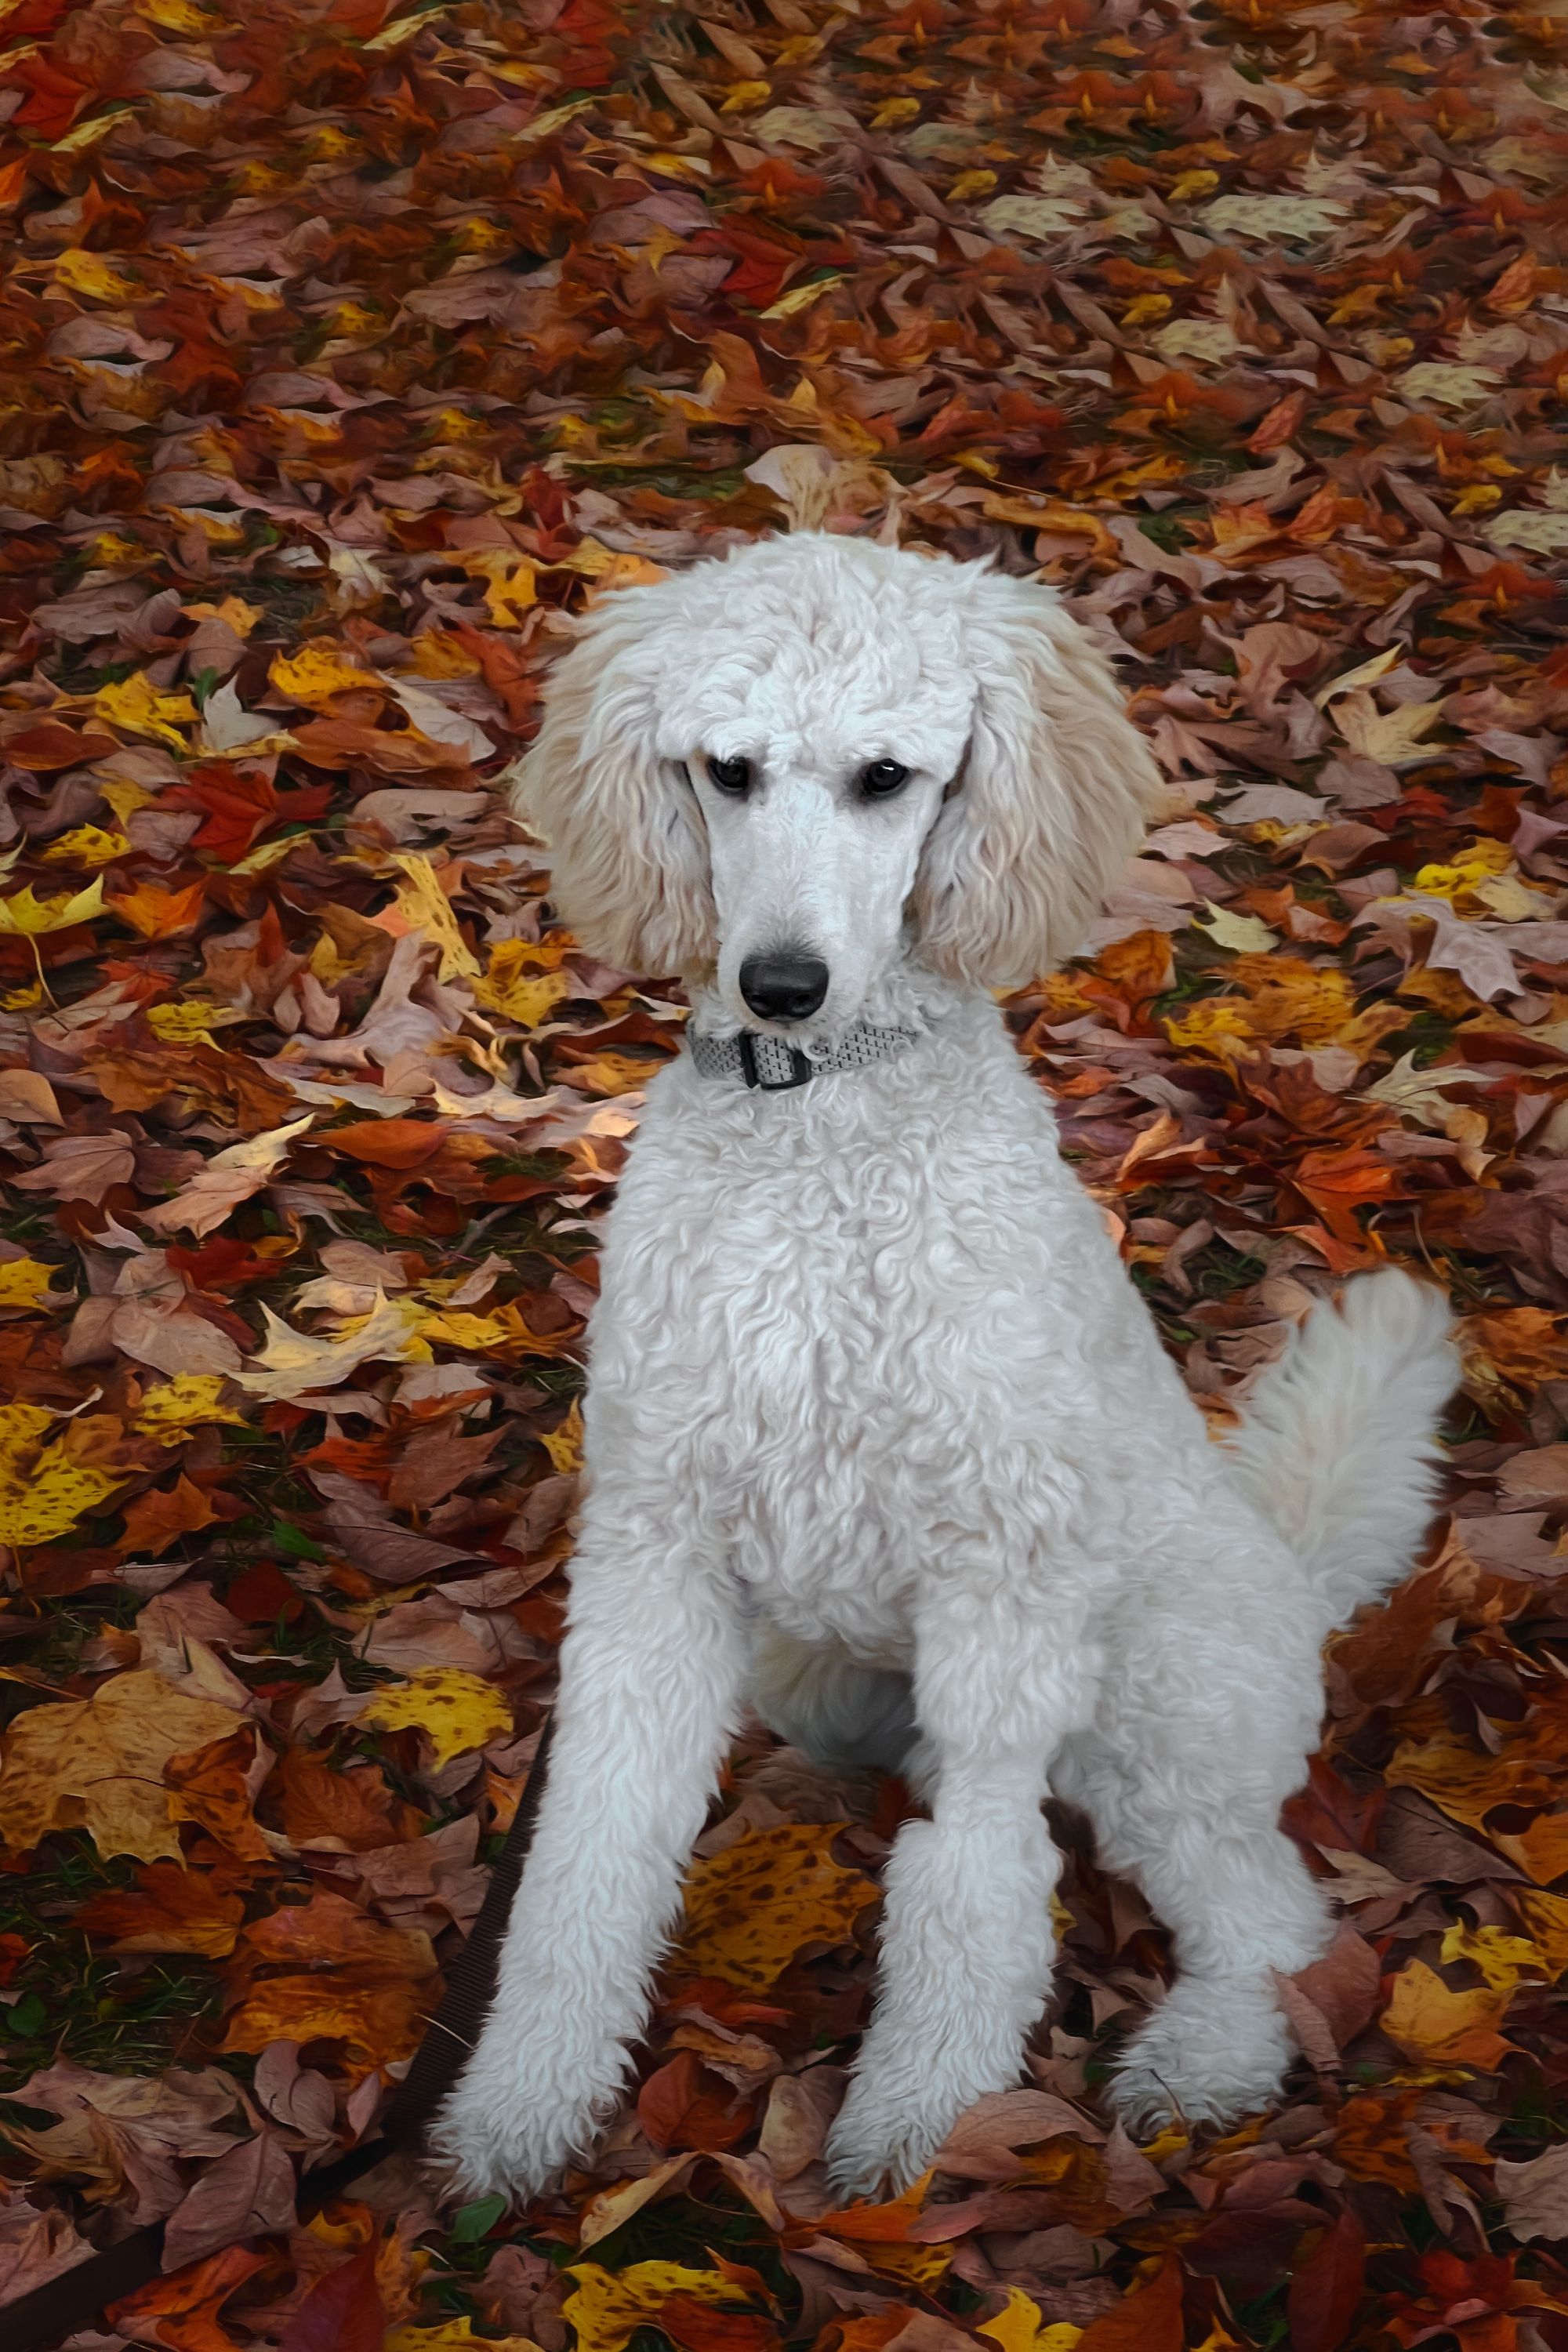 10 Curly-Haired Dog Breeds: From Small to Large